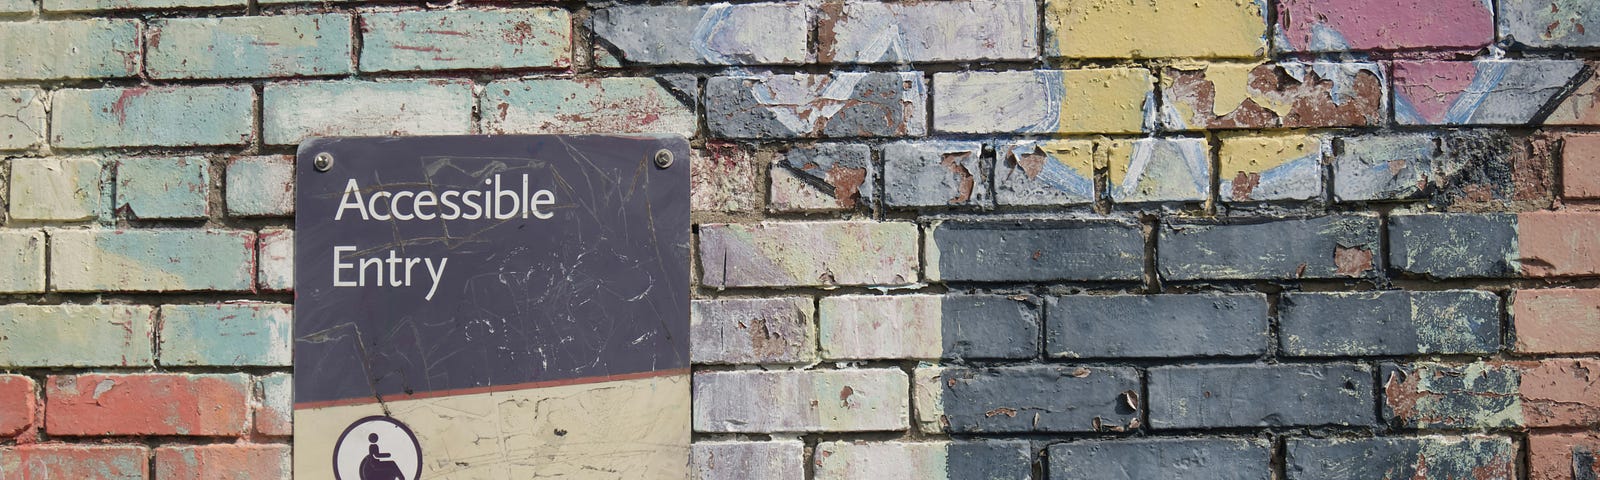 A colourfully painted brick wall has a sign saying ‘Accessible Entry’.